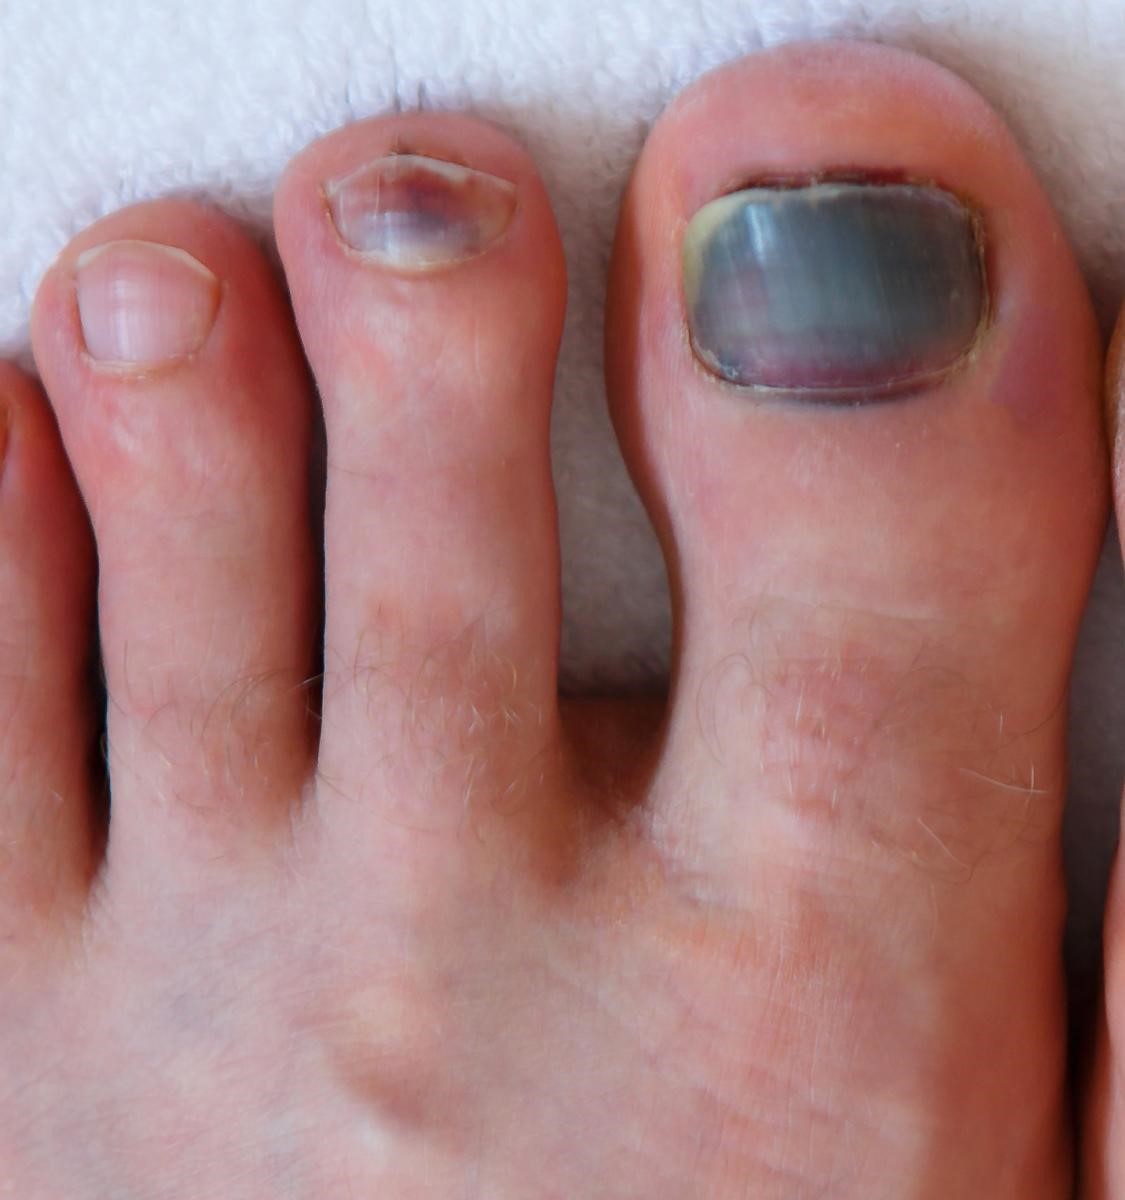 Nail Abnormalities: Symptoms, Causes, and Prevention